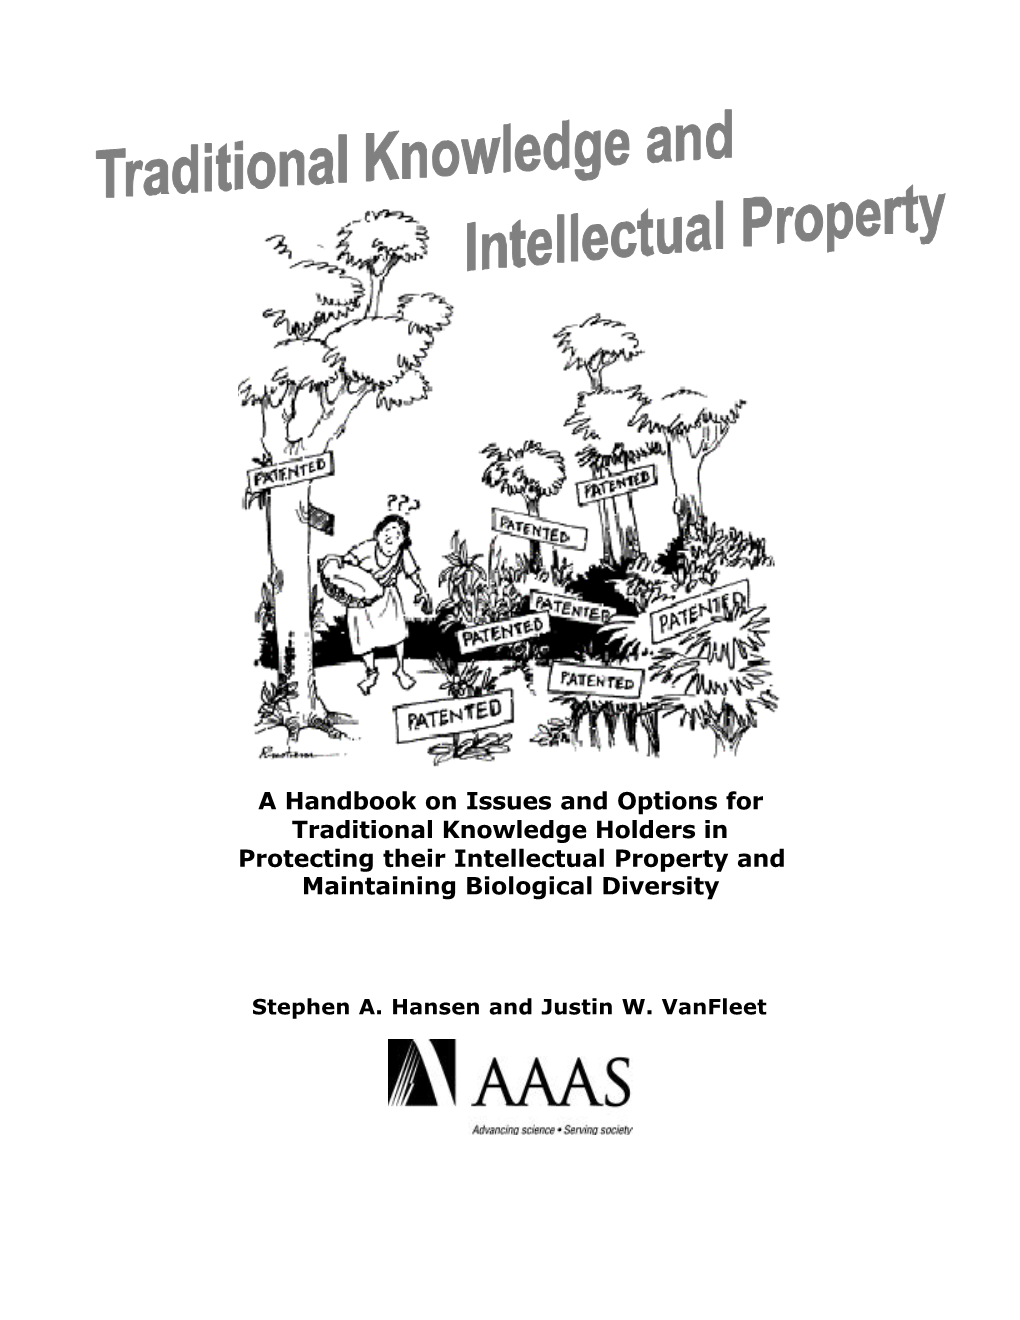 A Handbook on Issues and Options for Traditional Knowledge Holders in Protecting Their Intellectual Property and Maintaining Biological Diversity